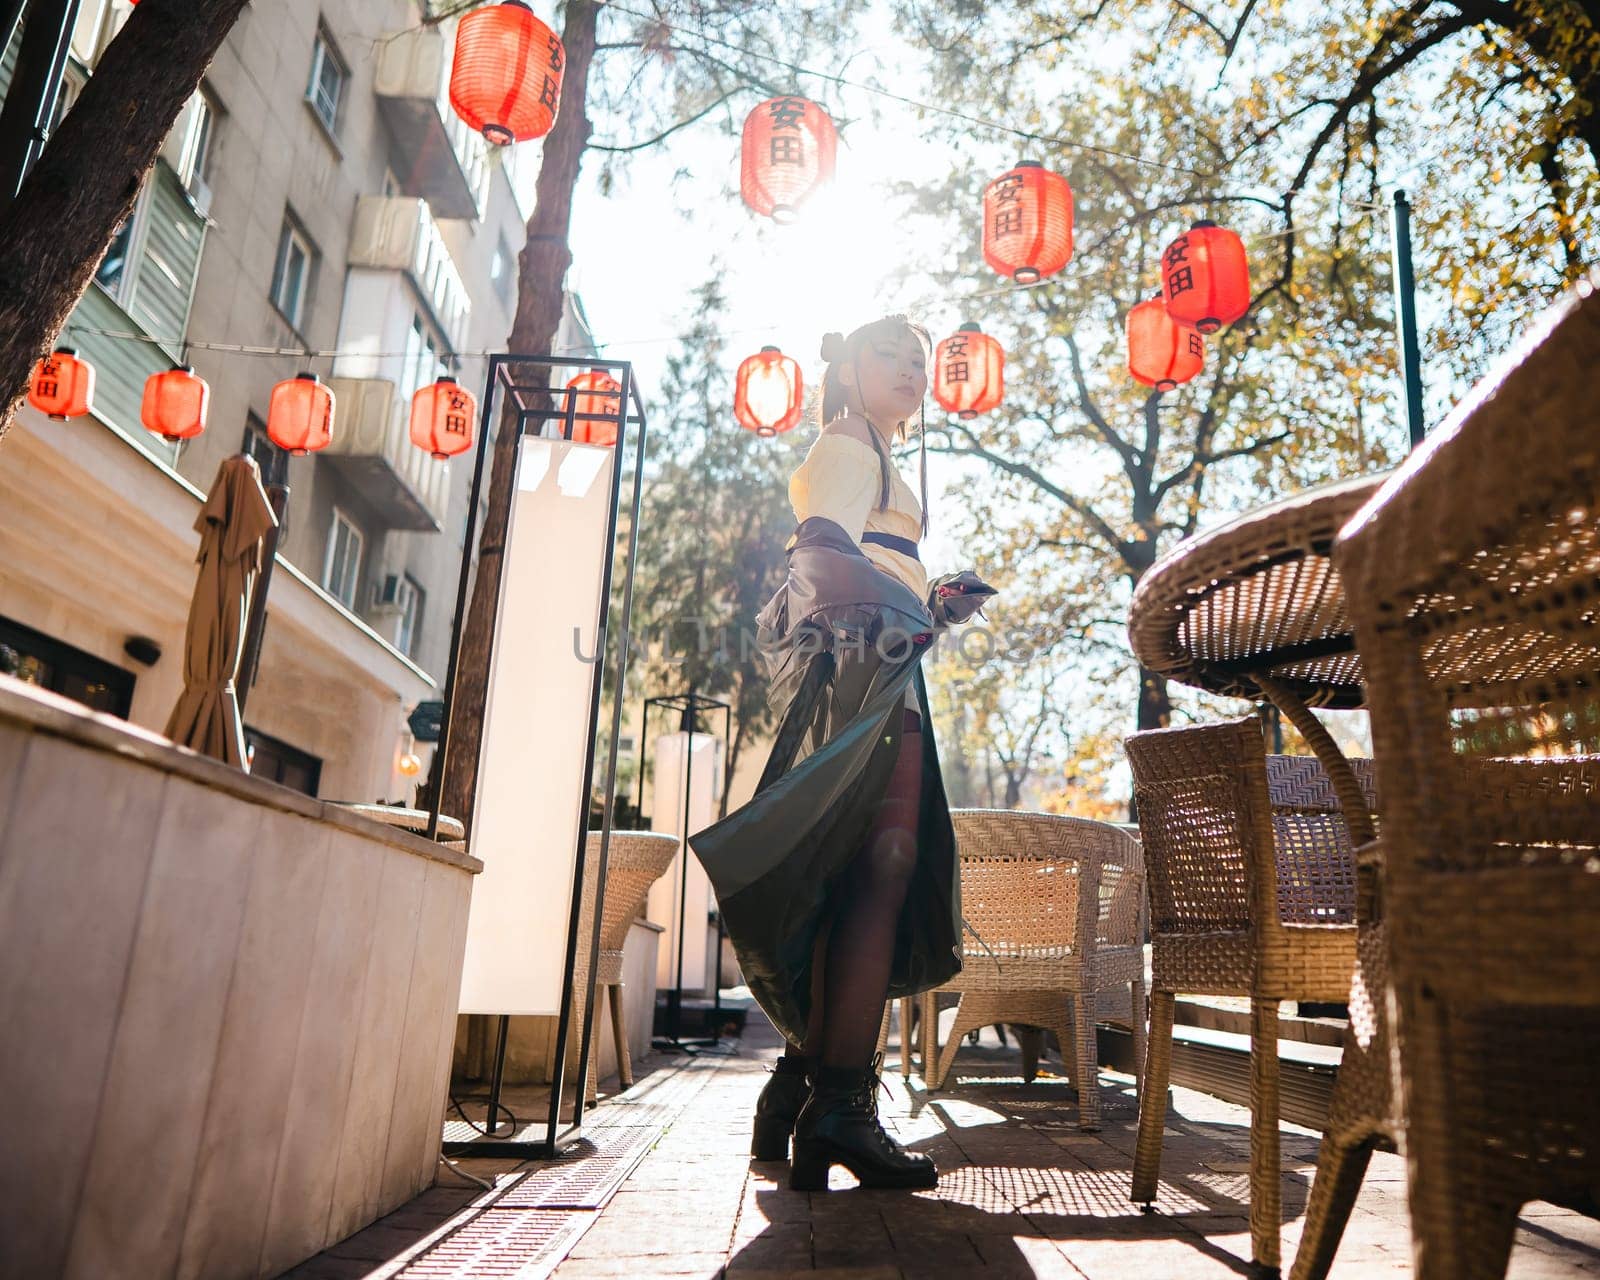 Portrait of an Asian woman against the background of Chinese lanterns outdoors